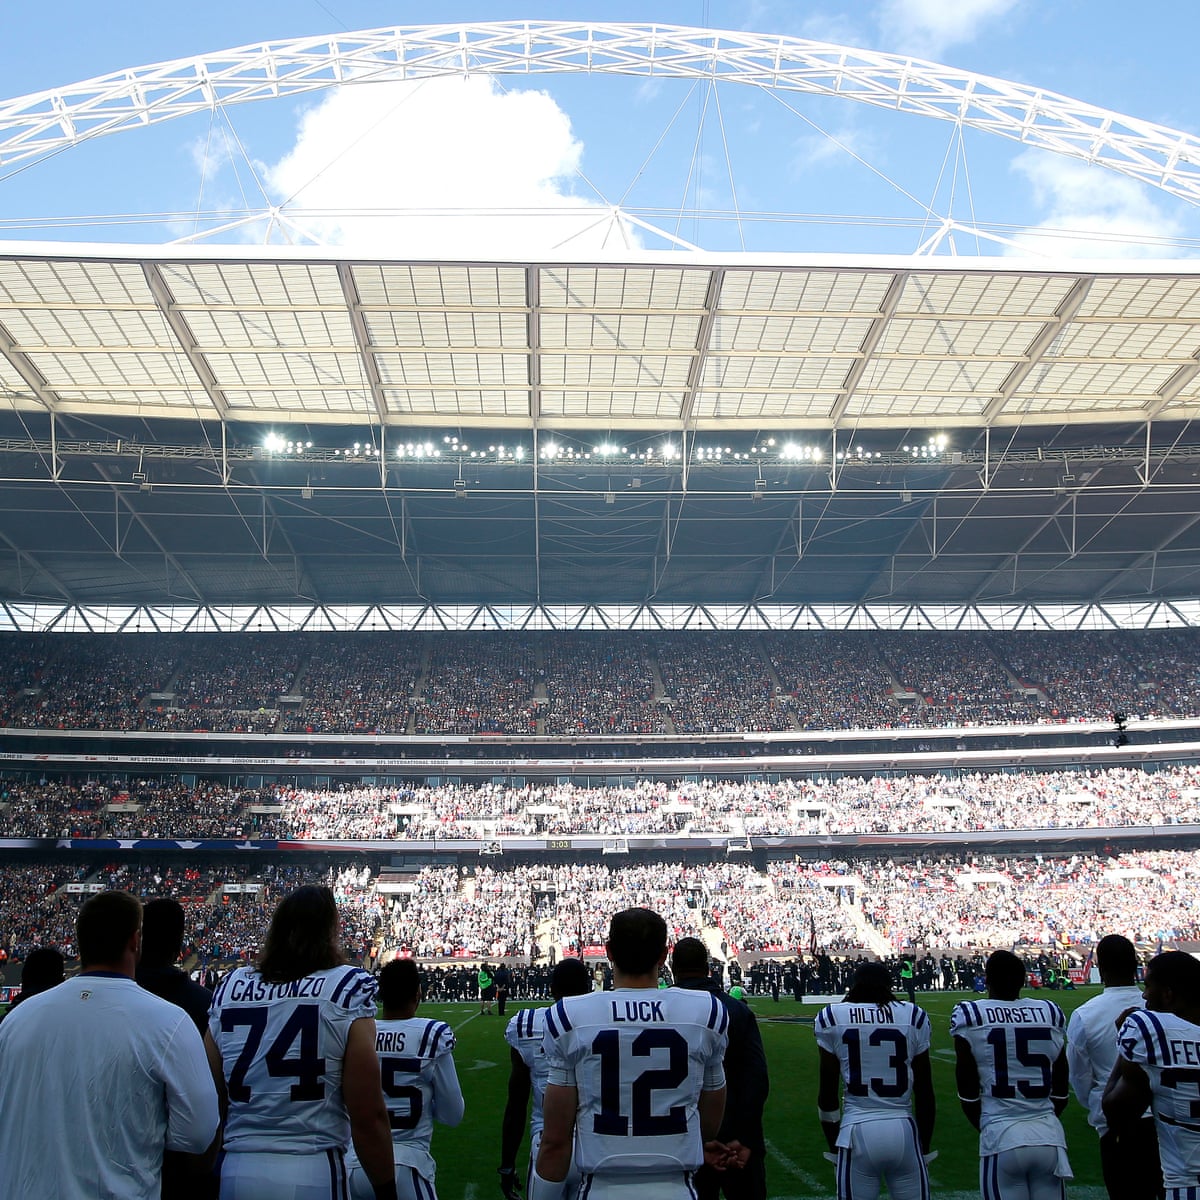 NFL pushes hard for London team but may encounter resistance at home, NFL